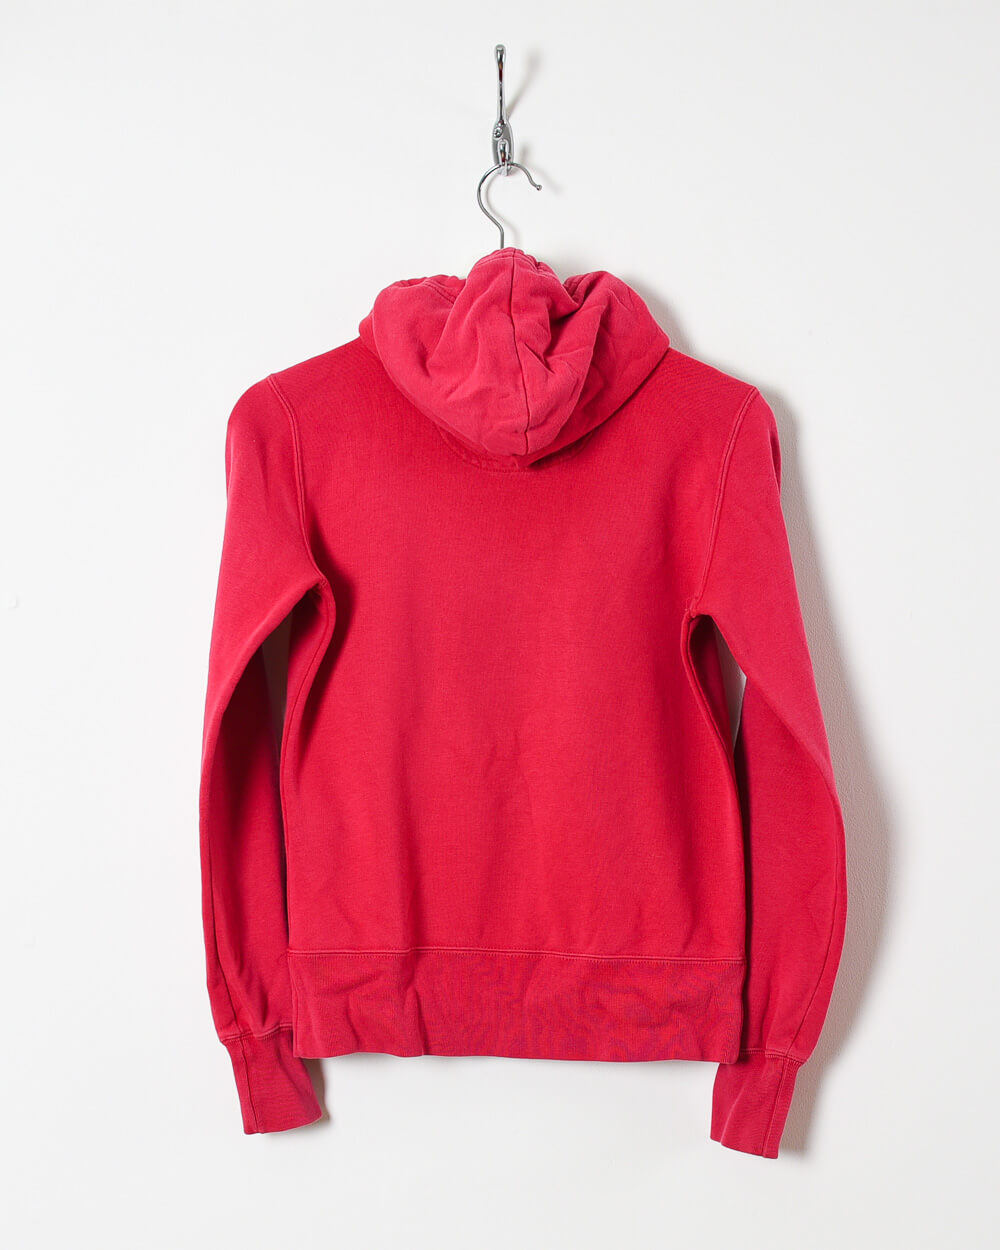 Champion Women’s Hoodie - Small - Domno Vintage 90s, 80s, 00s Retro and Vintage Clothing 